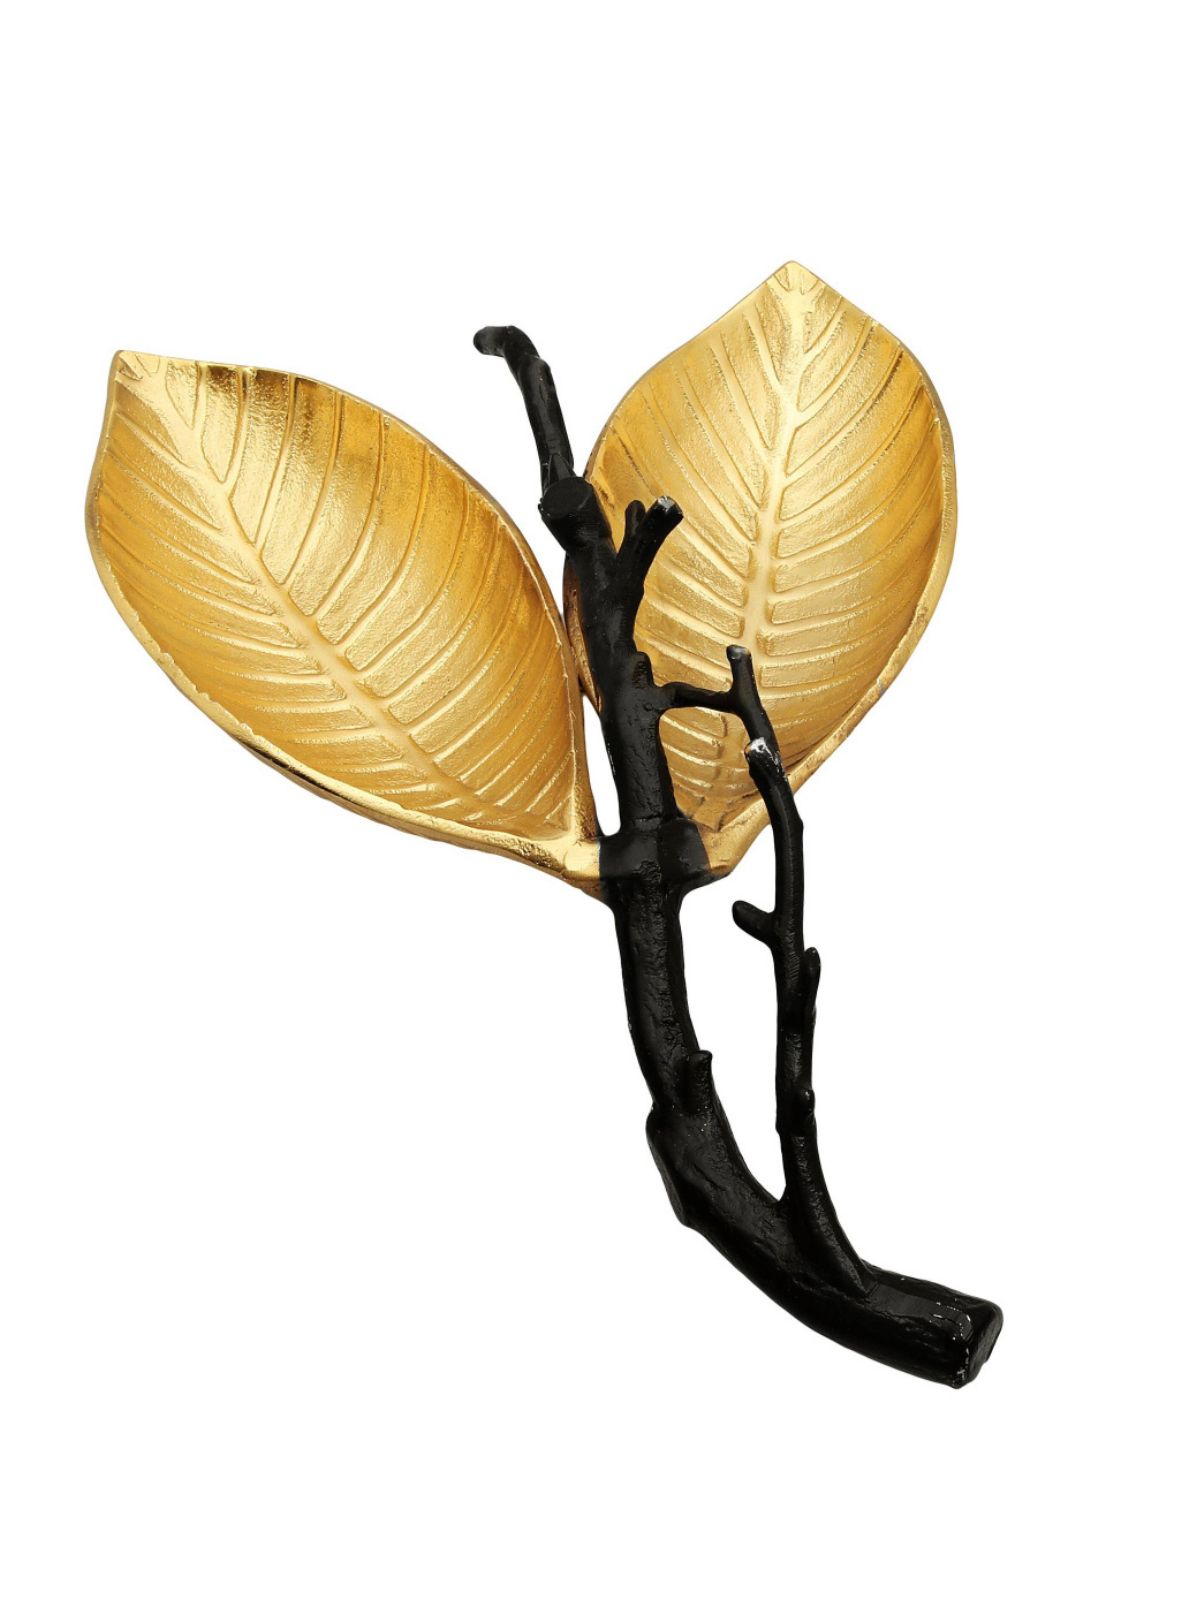 This 21 inch Gold 2 Leaf Shaped Dish with Black Branch was artfully designed with quality stainless steel to create an elegant and sophisticated serving dish. Available at KYA Home Decor 